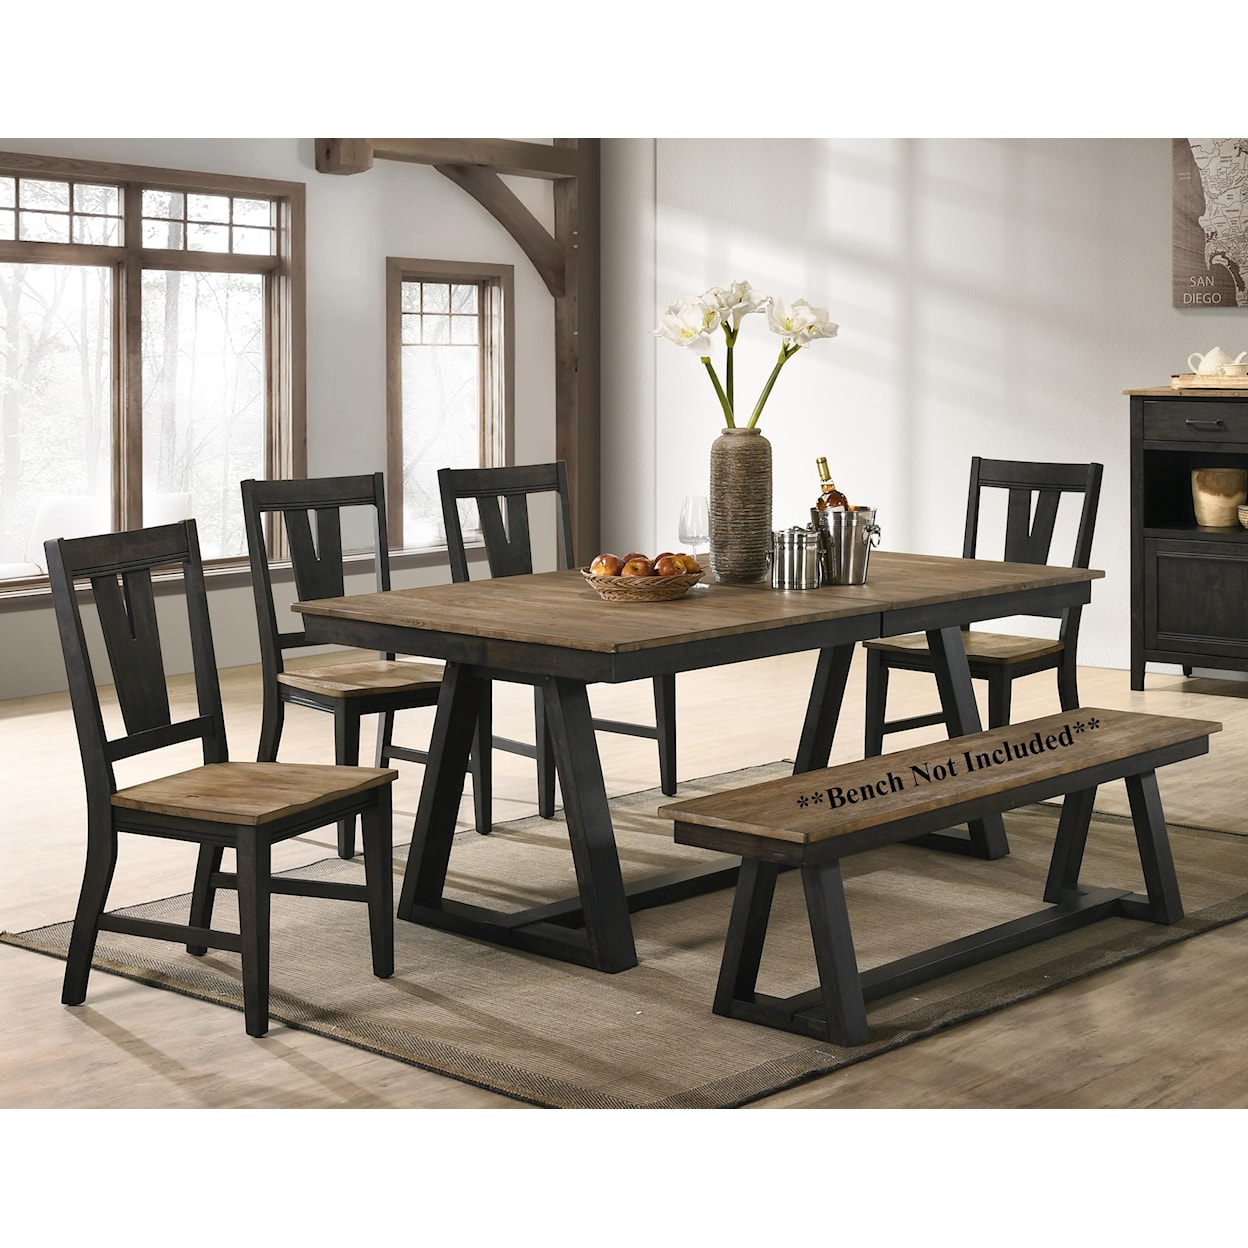 Intercon Harper 5-Piece Table and Chair Set